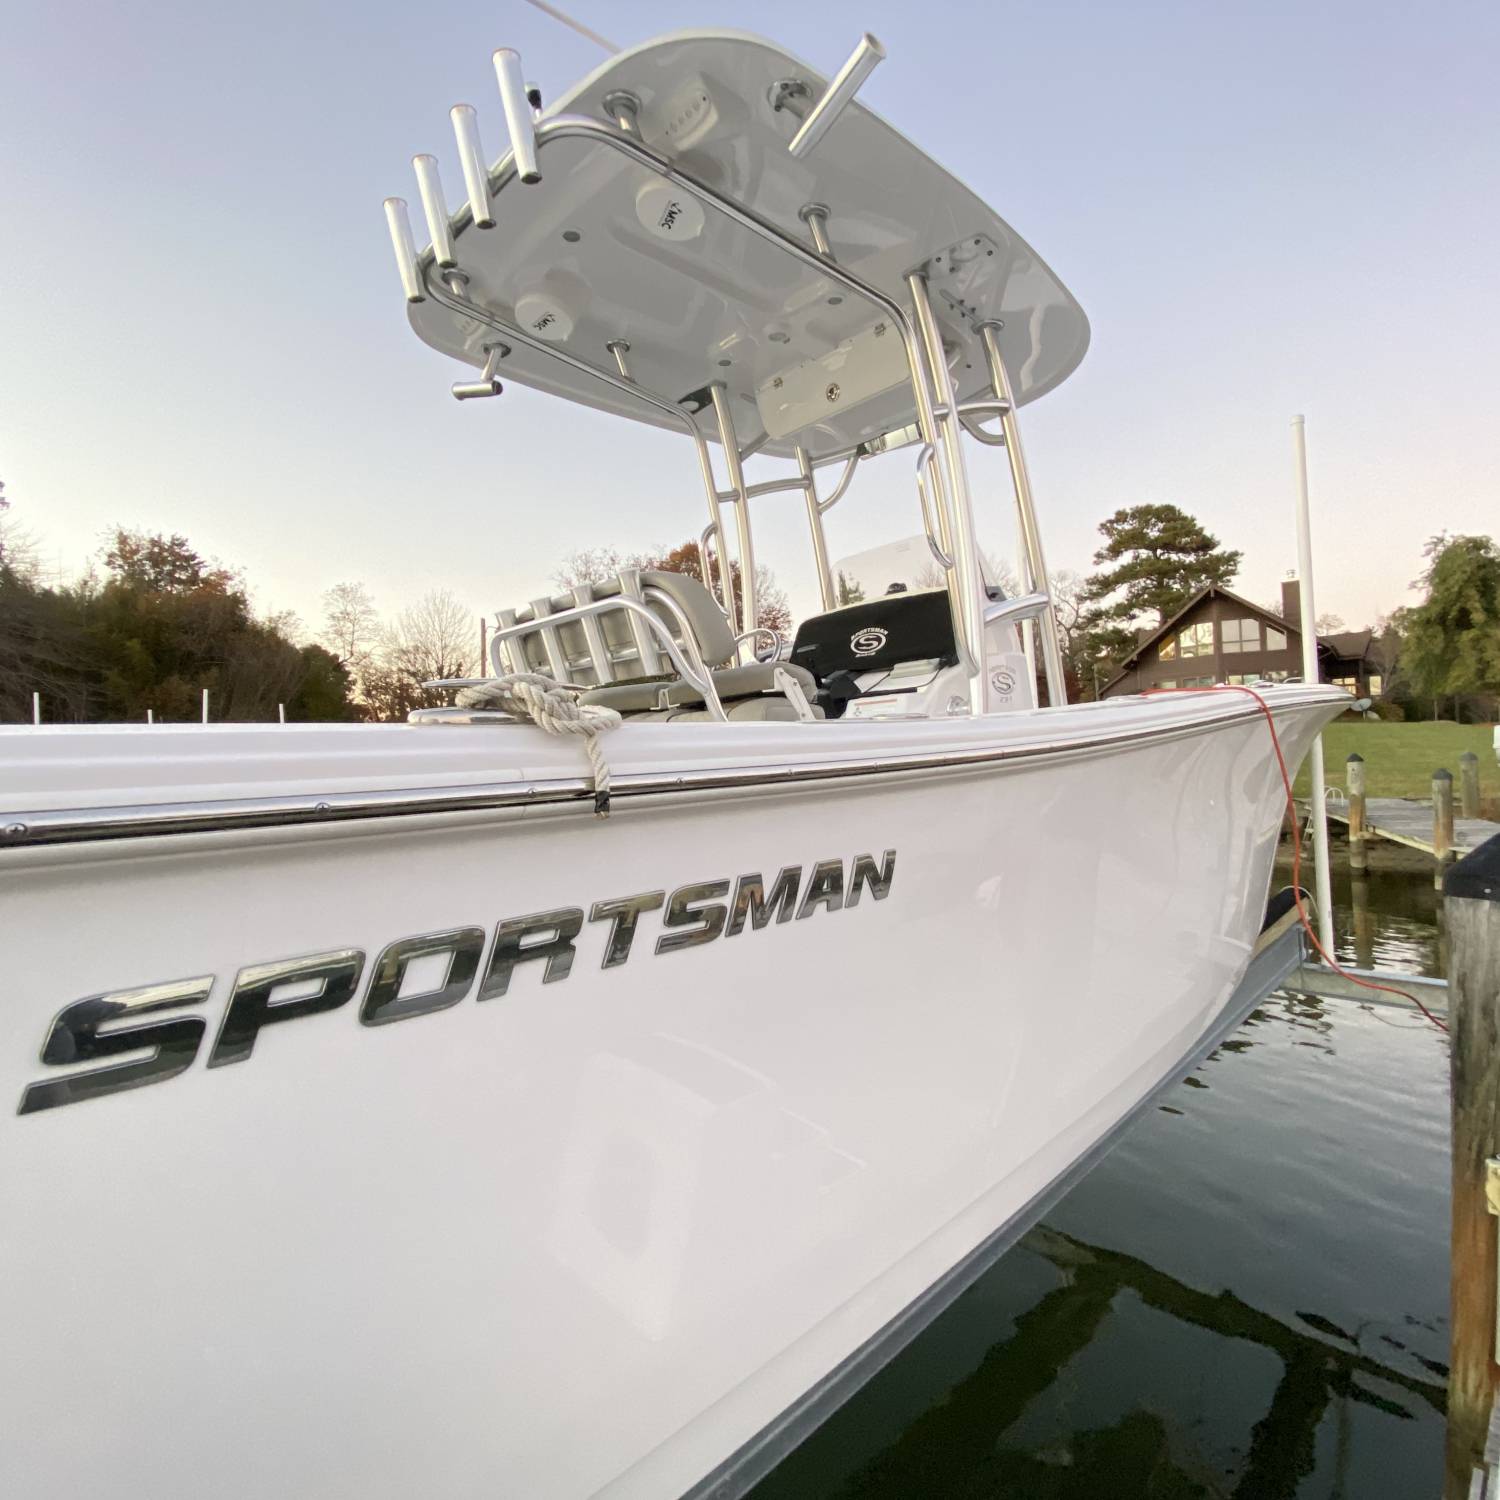 Title: Kaptain Kermit - On board their Sportsman Heritage 231 Center Console - Location: Solomons Island. Participating in the Photo Contest #SportsmanMay